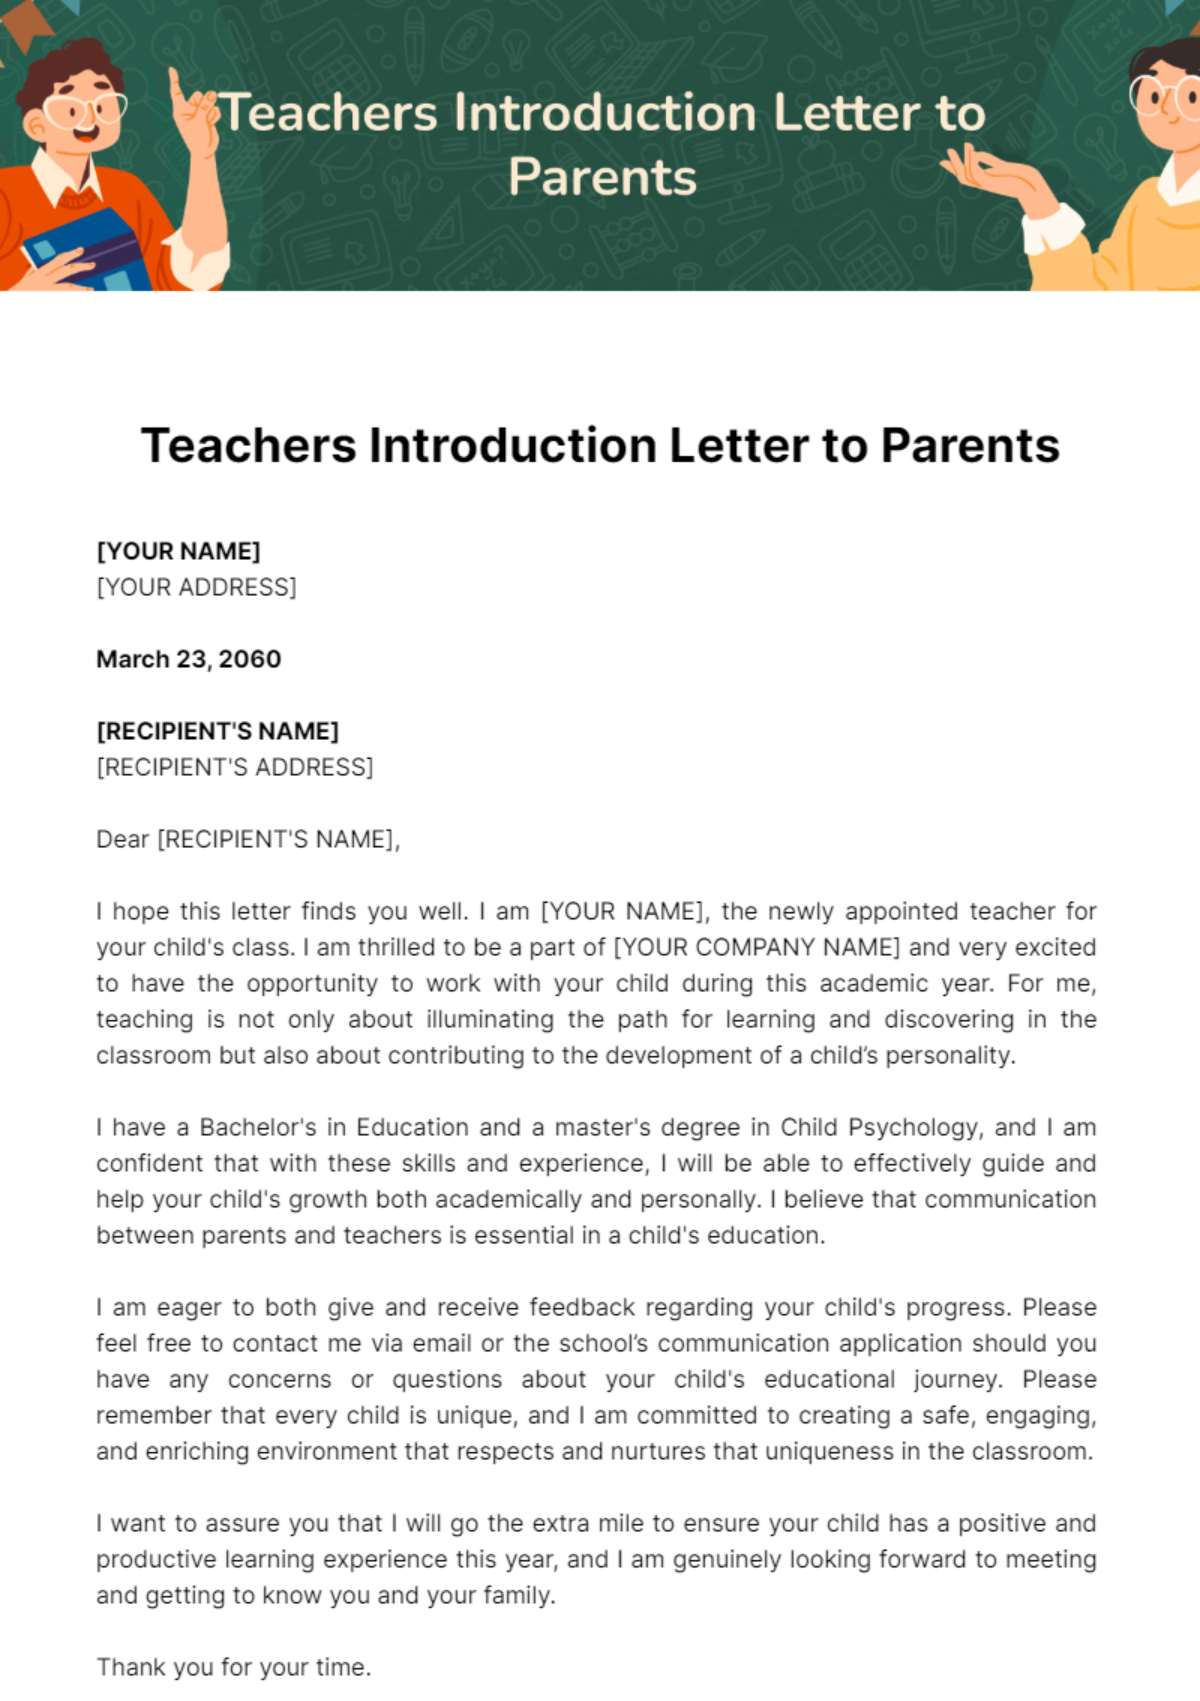 Free Teachers Introduction Letter to Parents Template